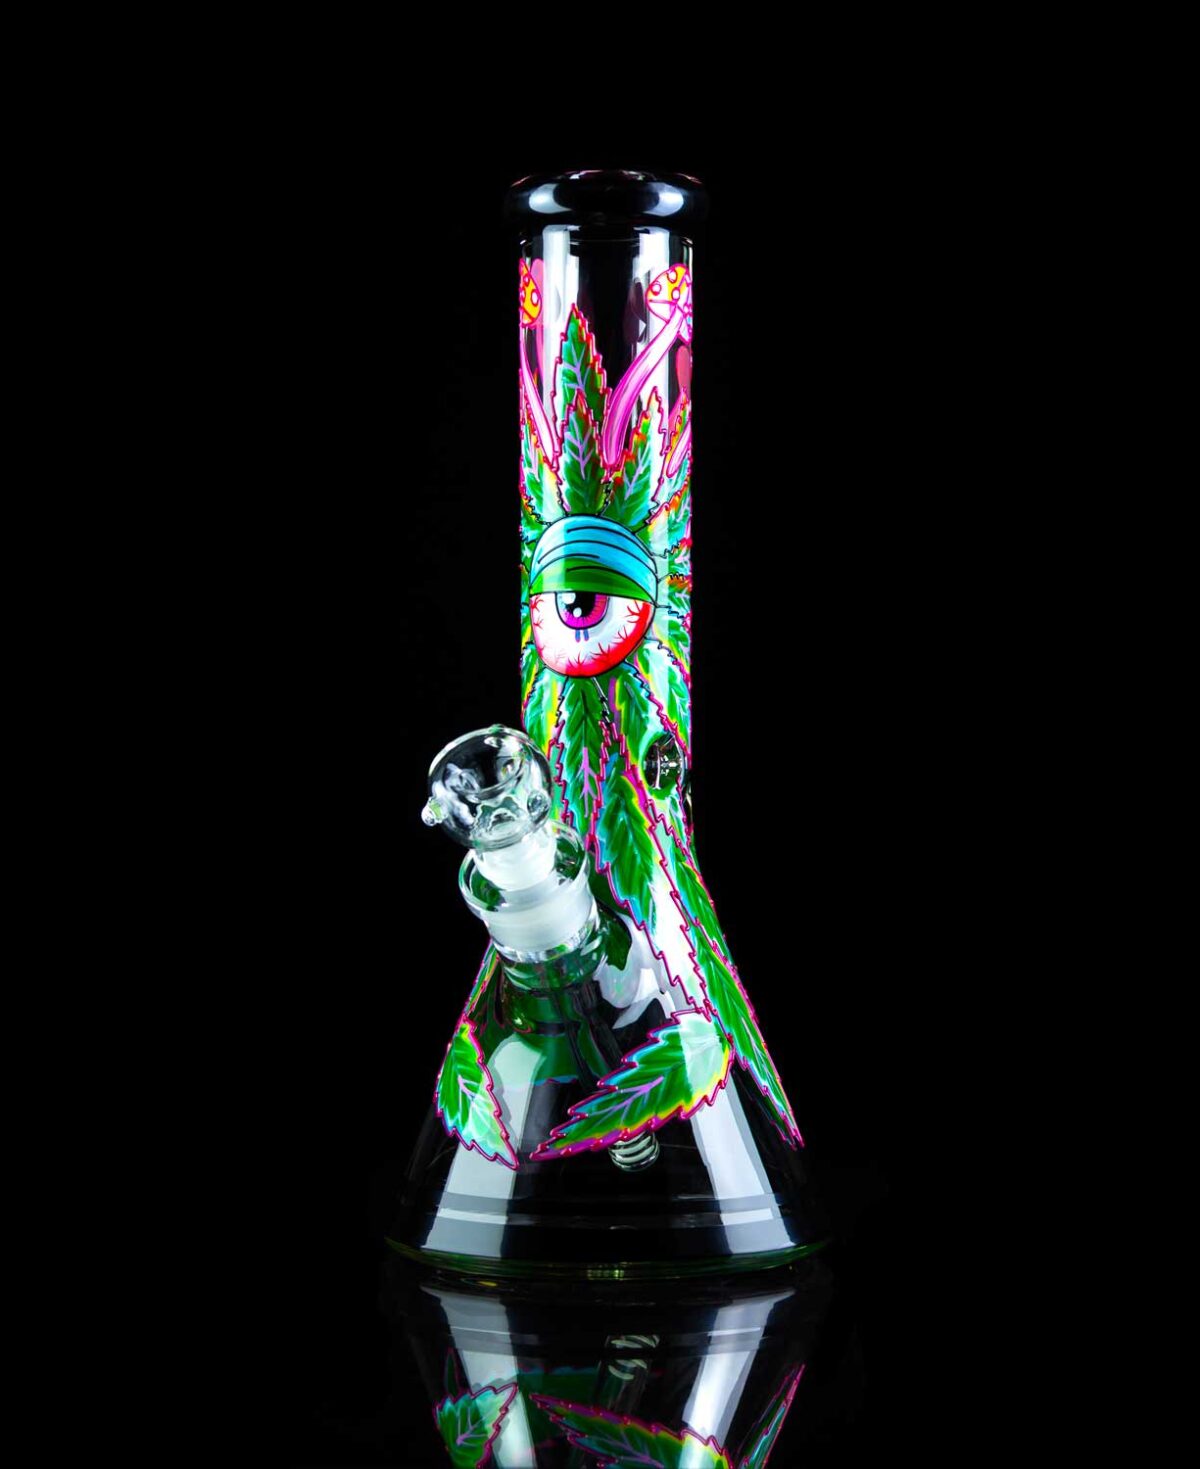 7mm bong with hand painted weed leaf design